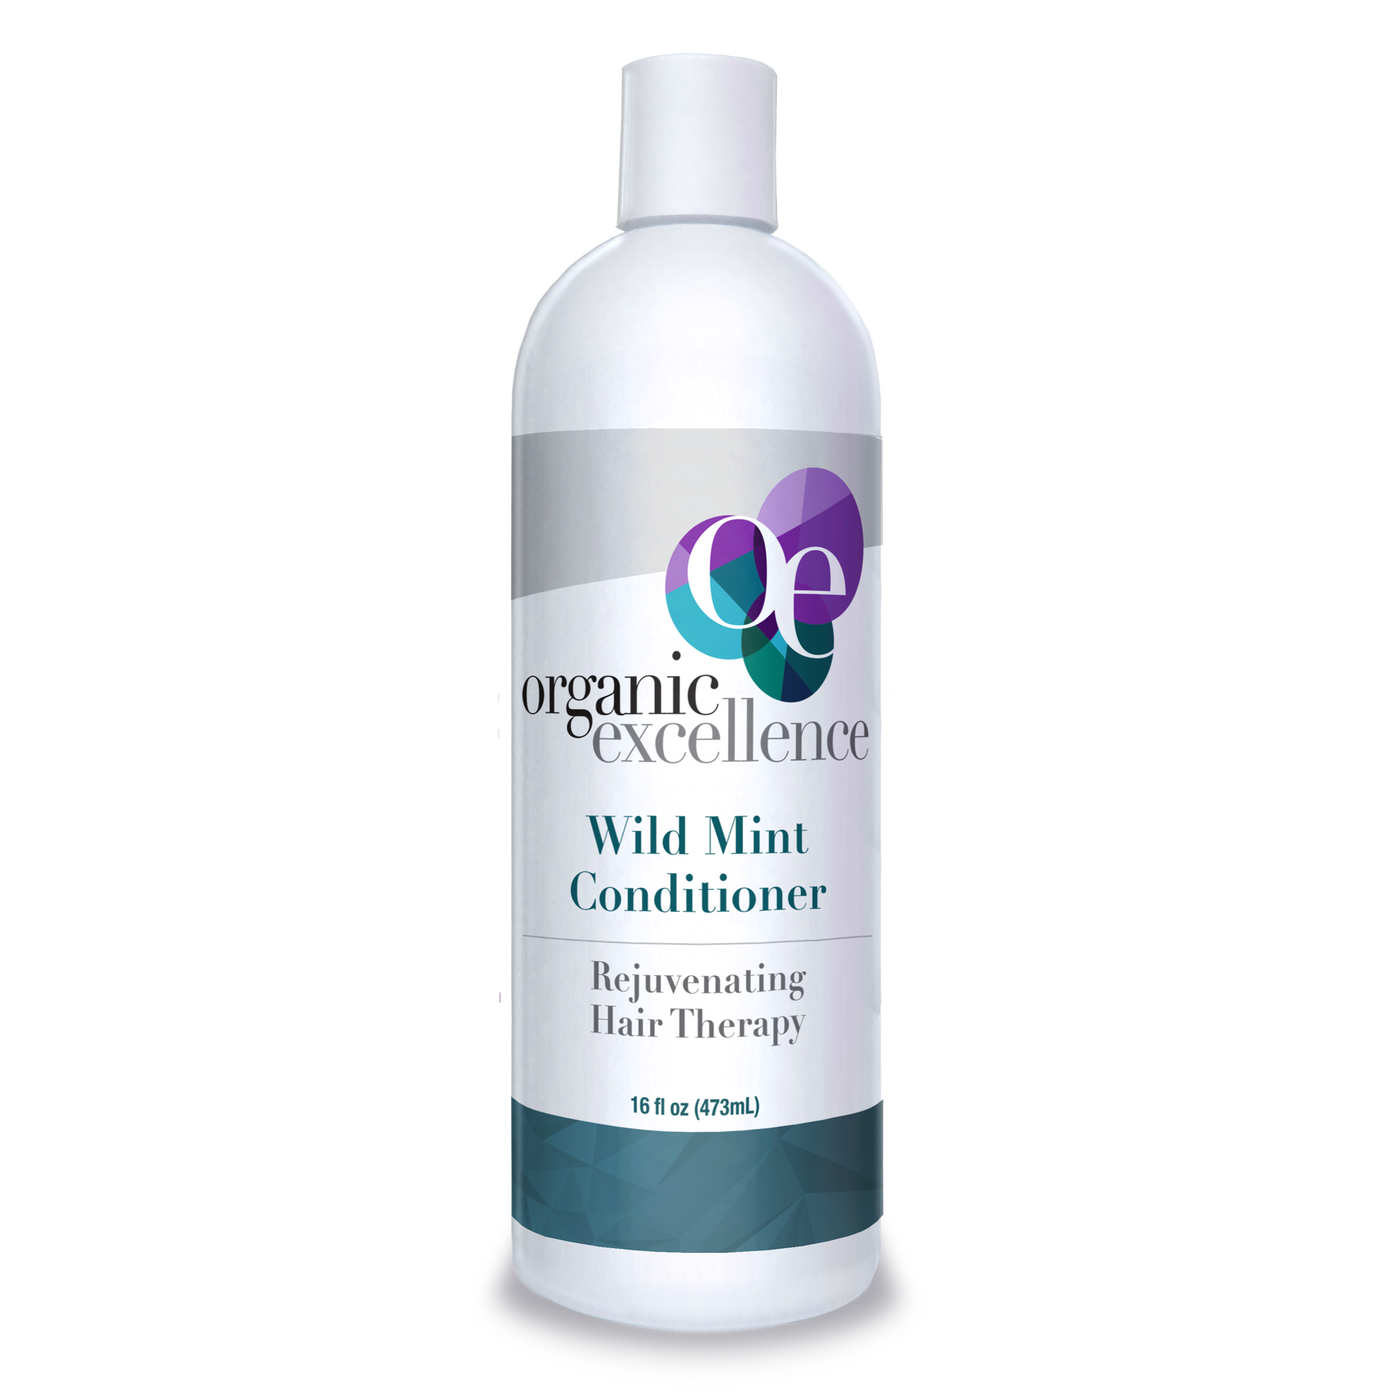 Wild Mint Conditioner 16 fl oz Curated Wellness